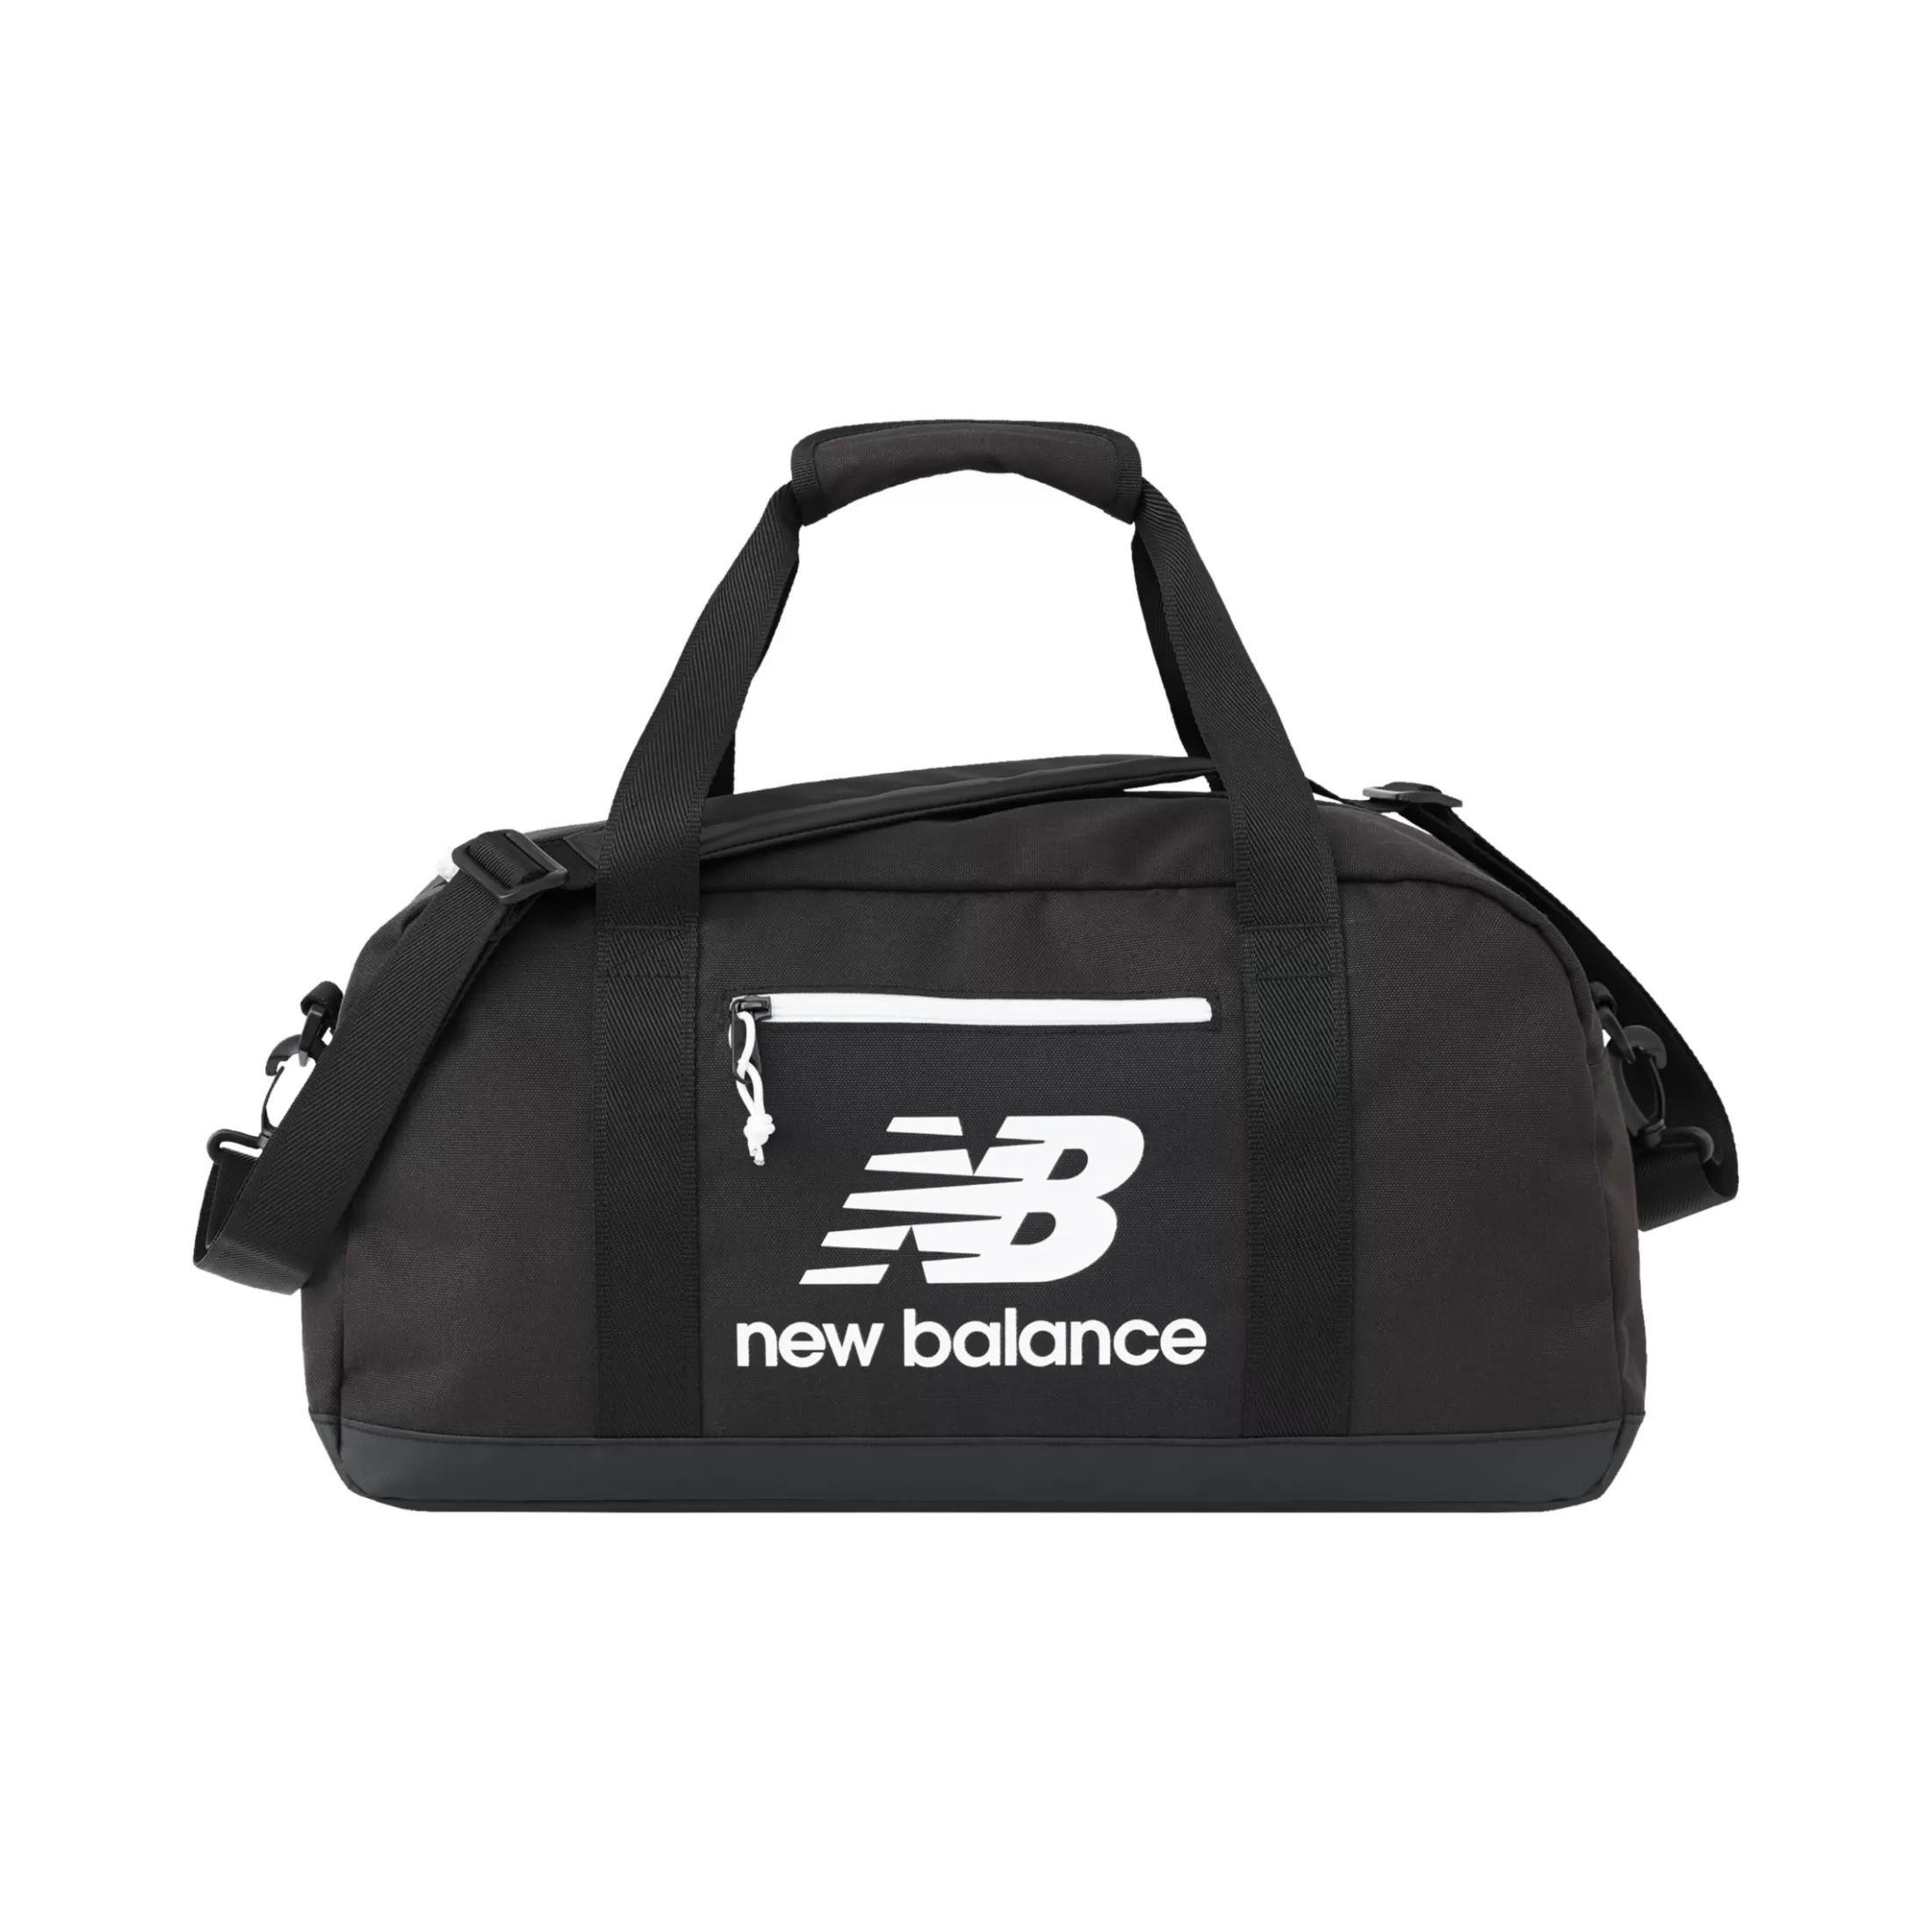 Hot Unisex Athletics Duffle Bag MULHER/HOMEN Bags & Backpacks | All Accessories